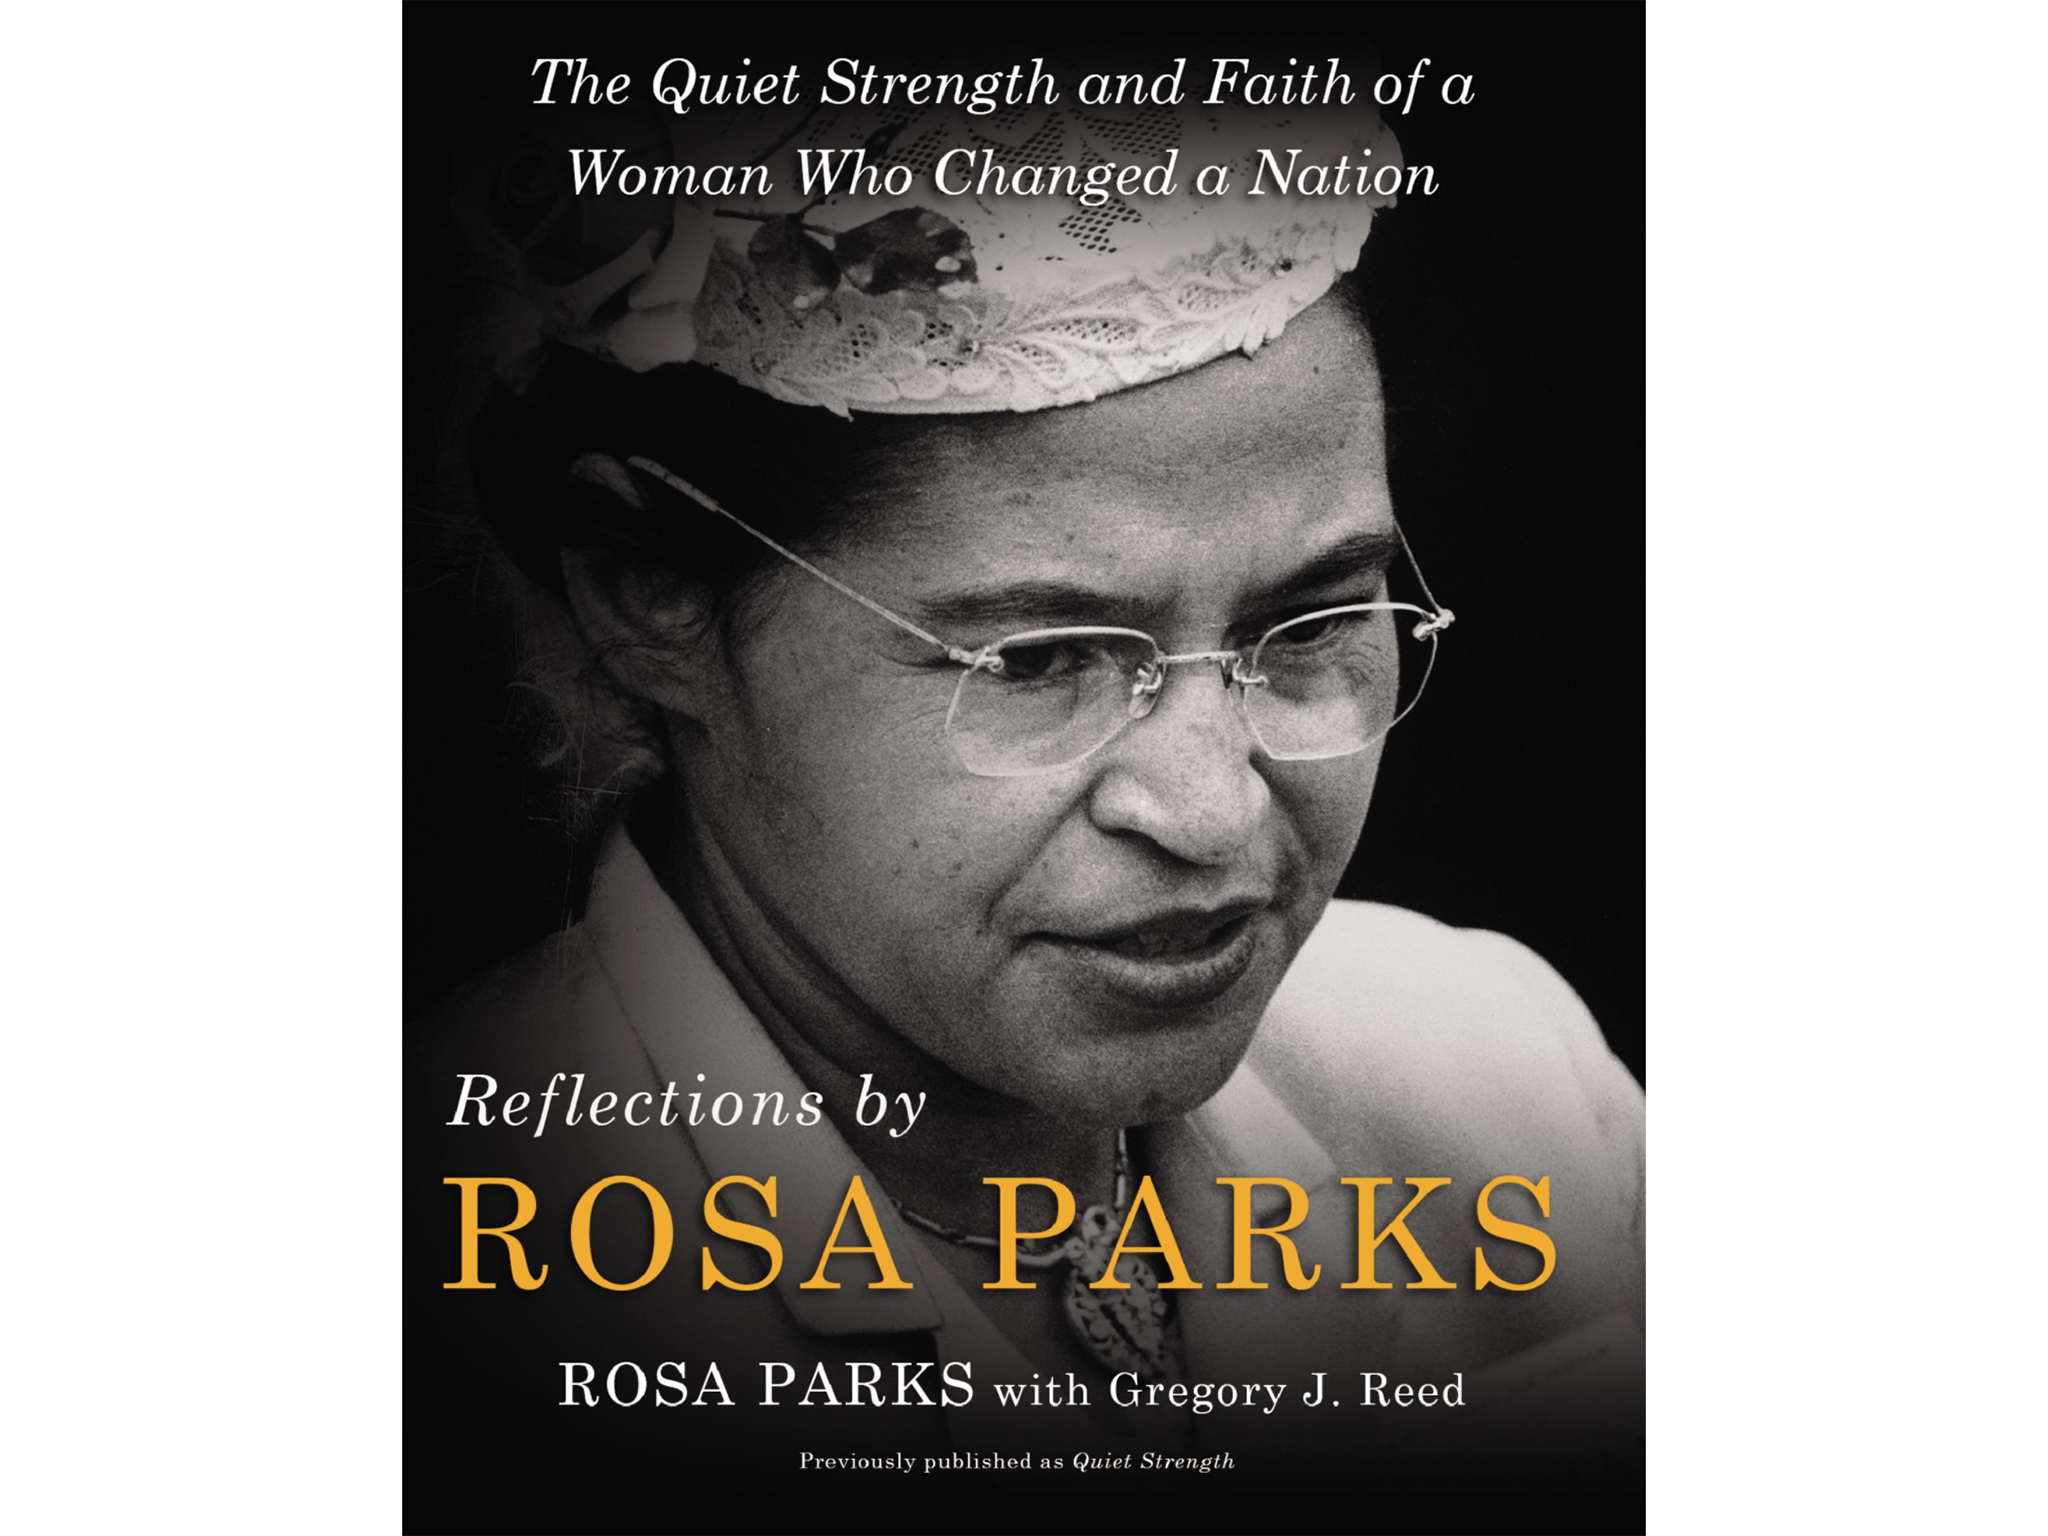 ‘Reflections by Rosa Parks’ by Rosa Parks indybest